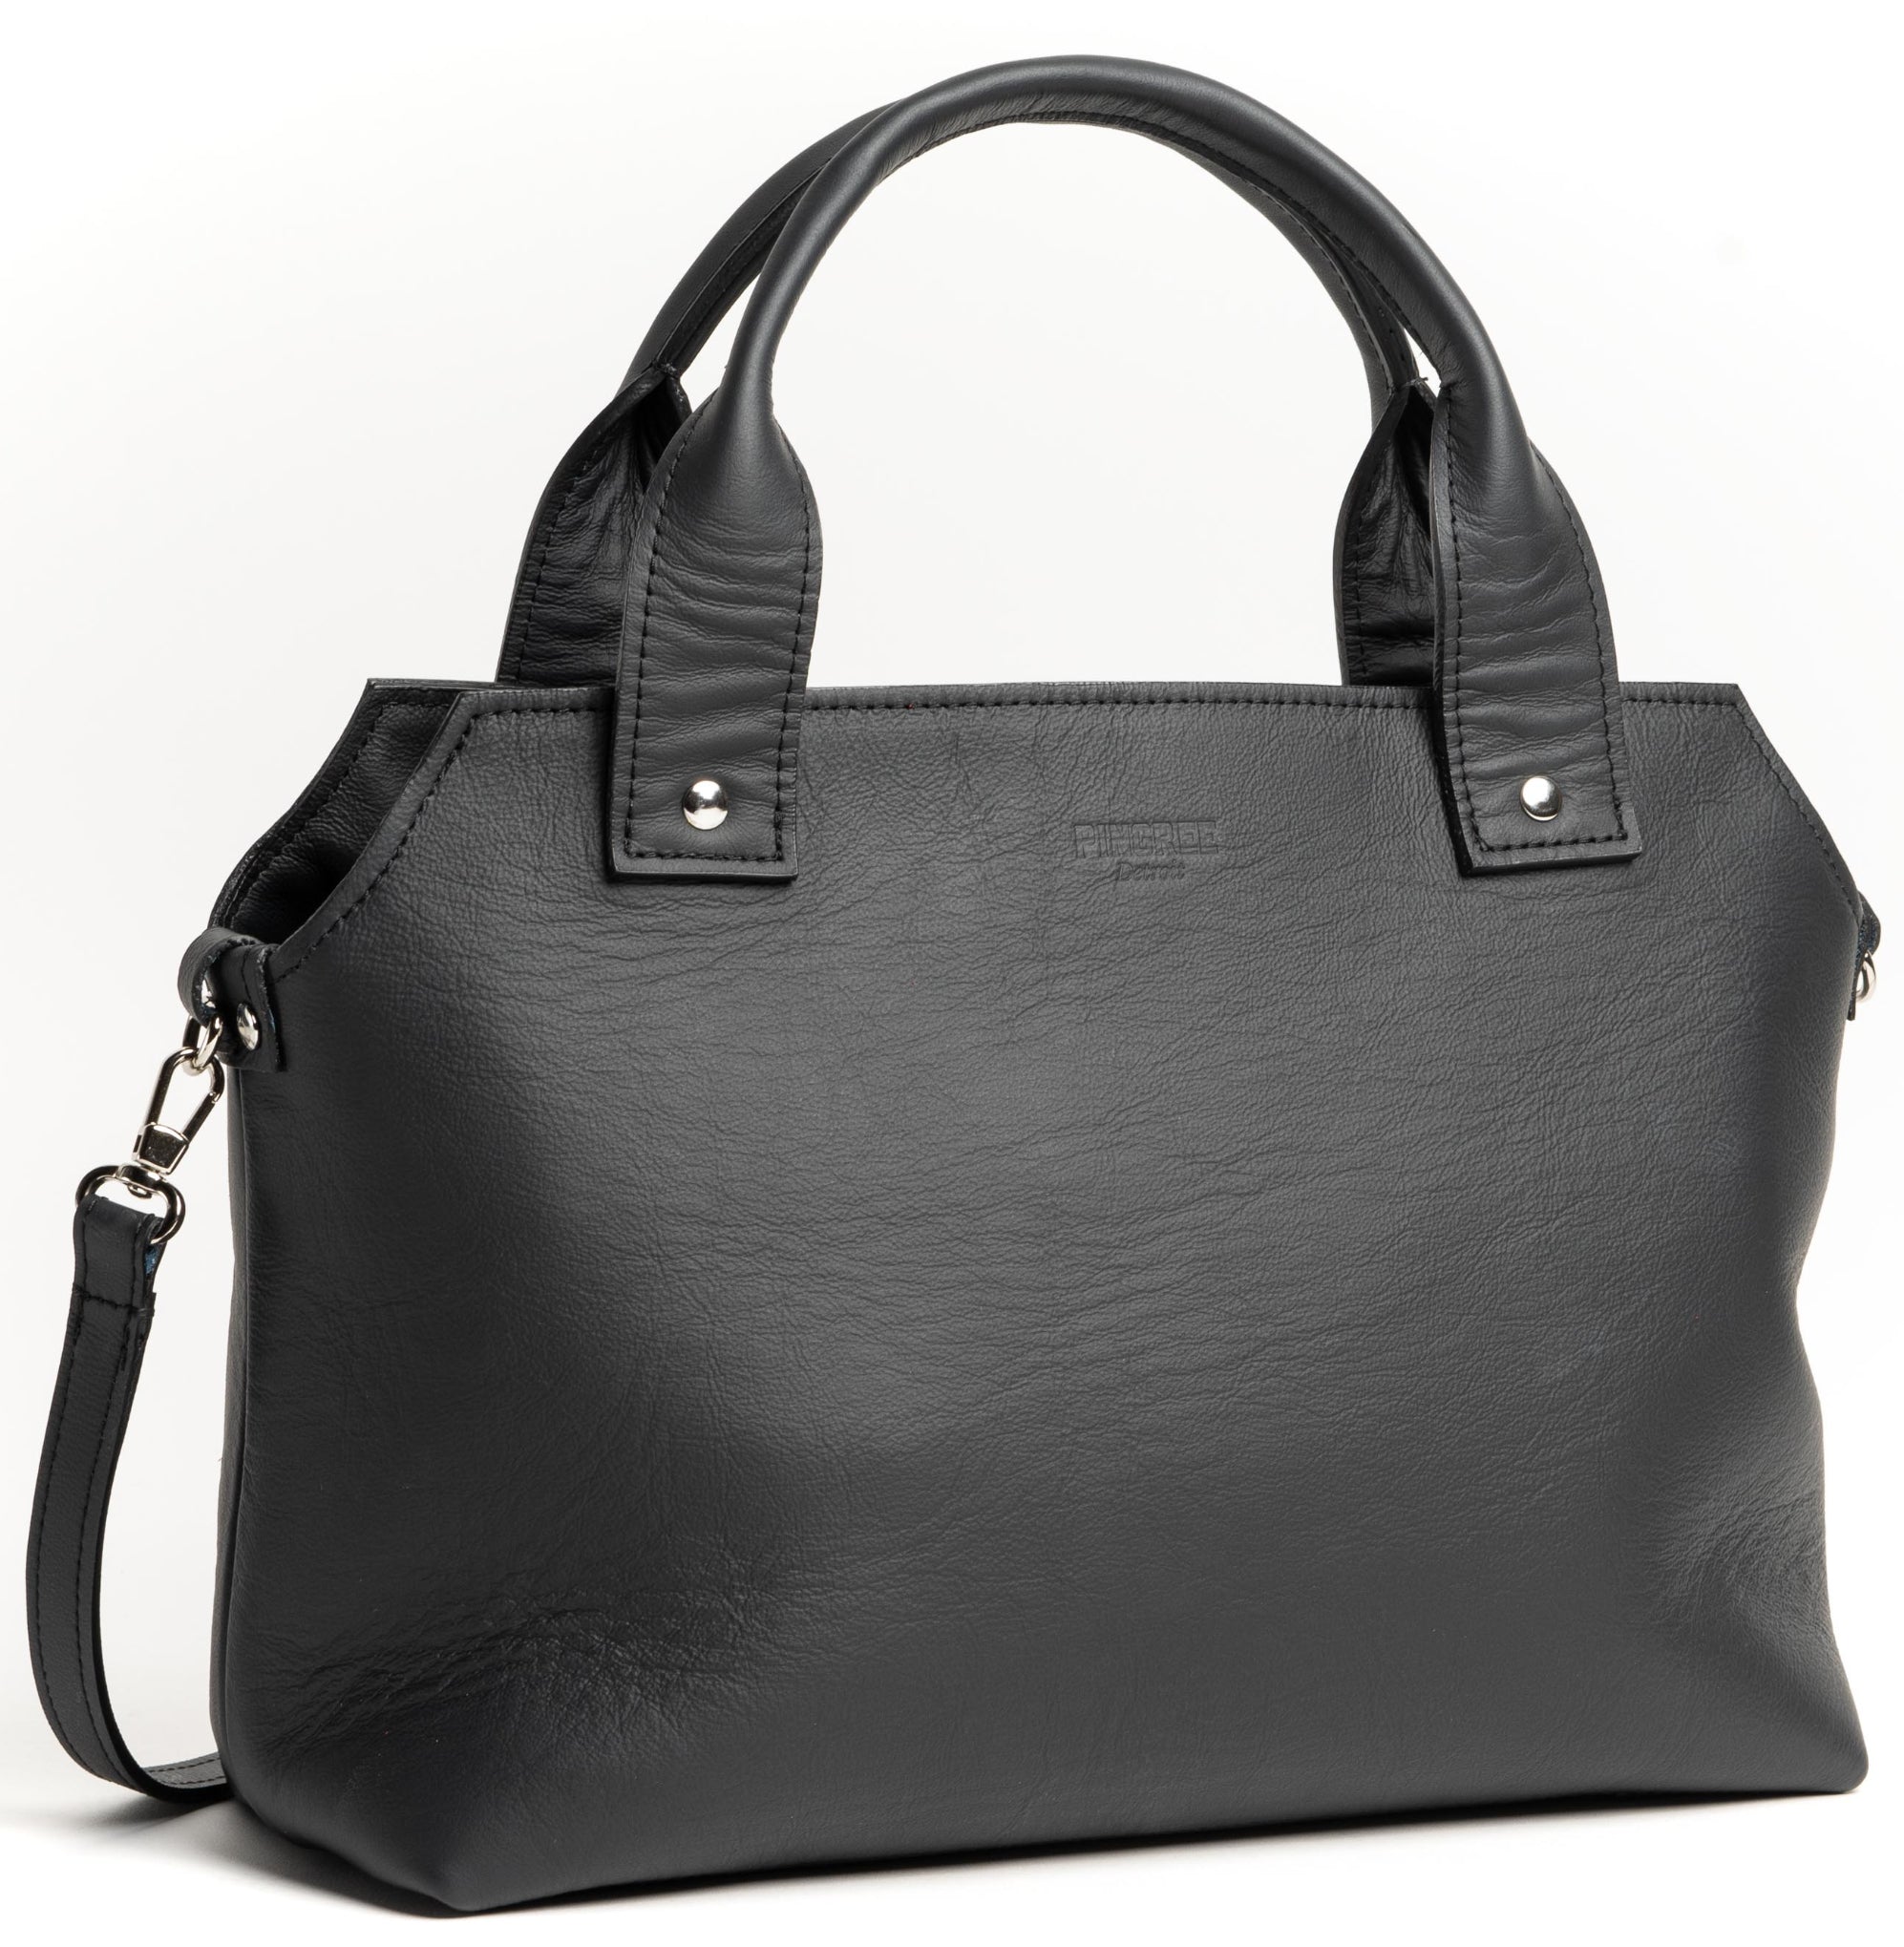 Beaubien purse in onyx black. Made from repurposed automotive leather. Sustainable manufacturing process,